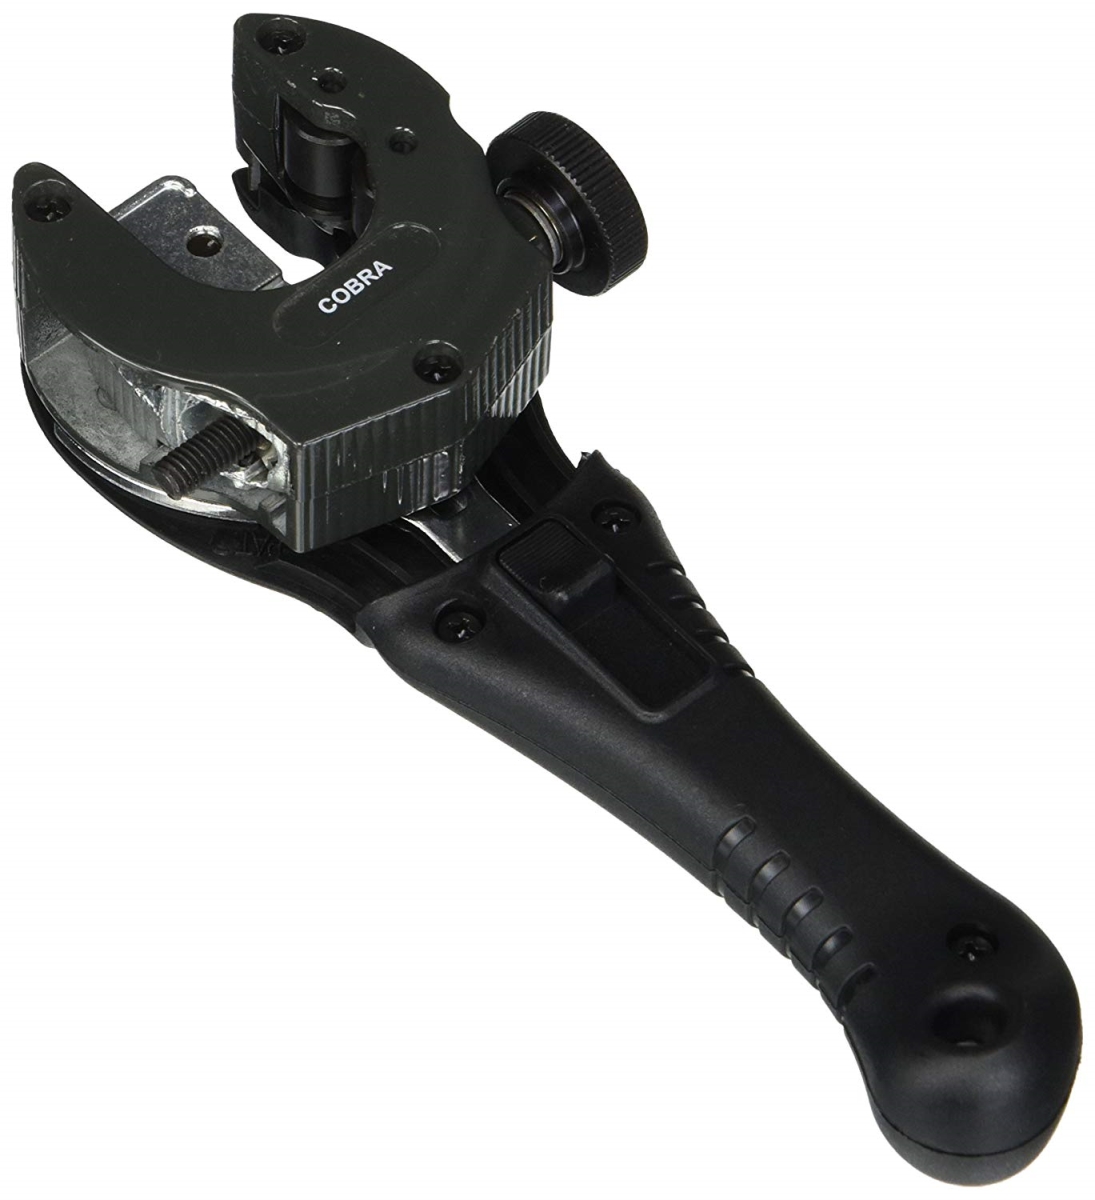 Pst011 2-in-1 Black Tube Cutter With Ratchet Handle